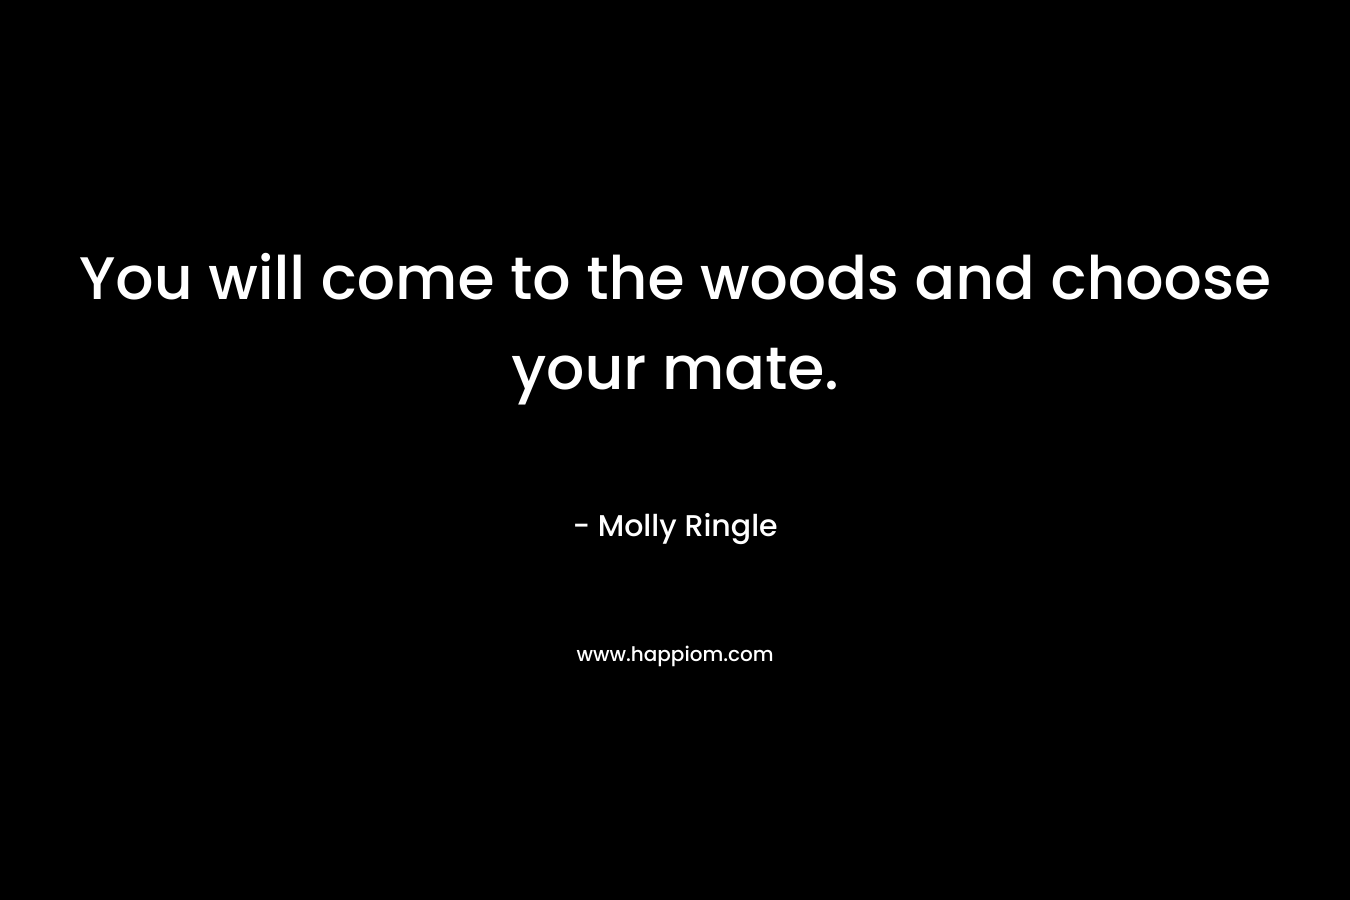 You will come to the woods and choose your mate. – Molly Ringle